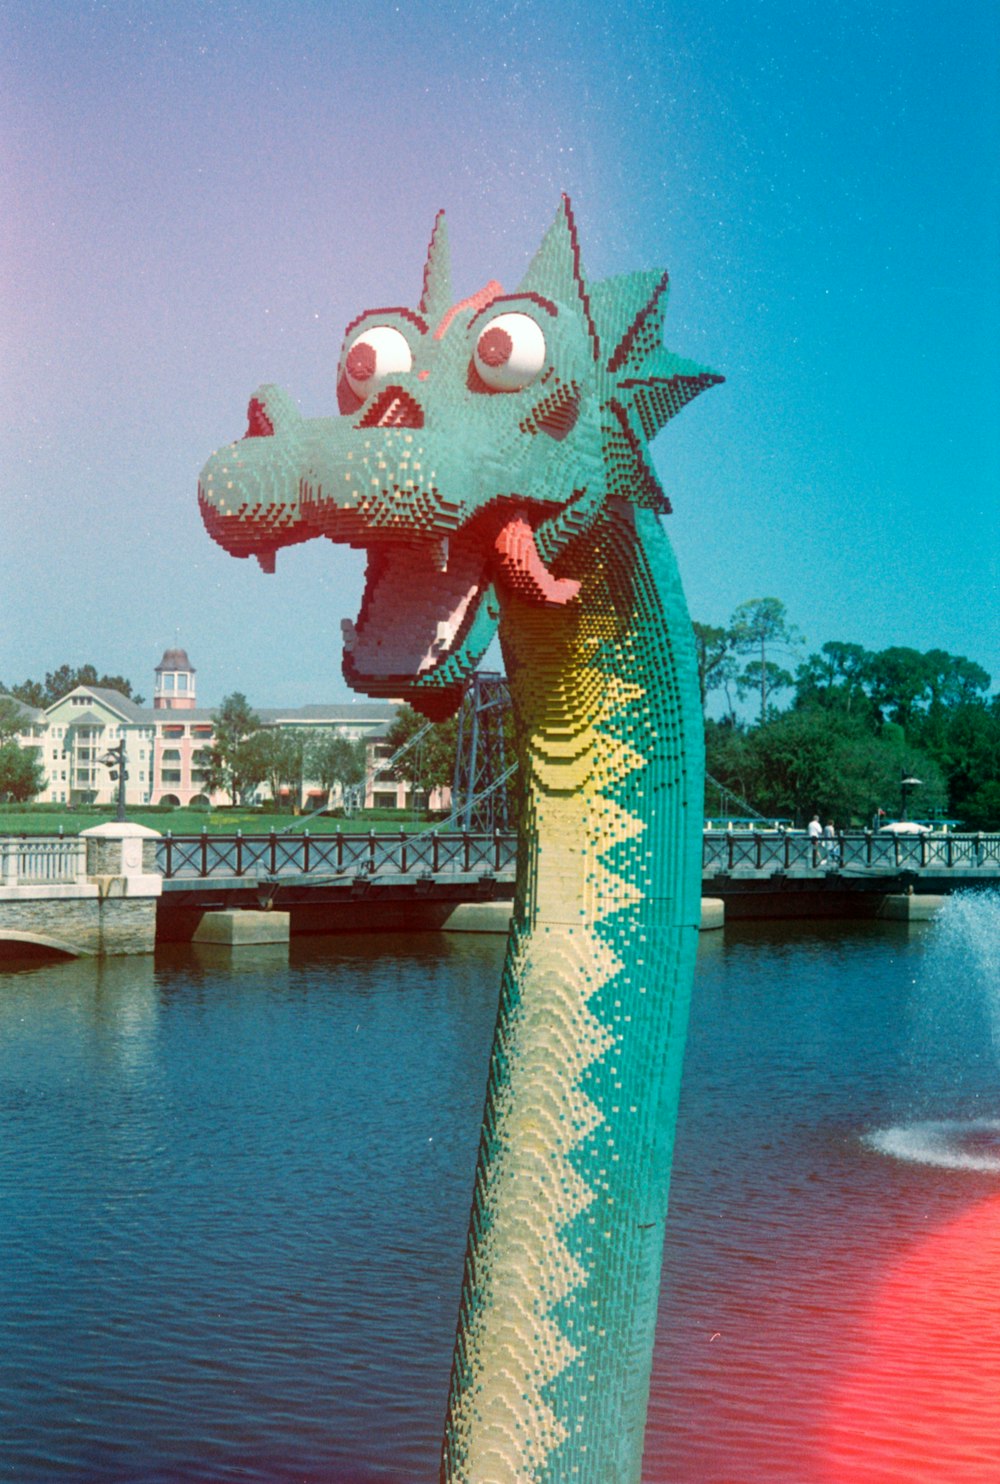 blue and yellow dragon statue near body of water during daytime